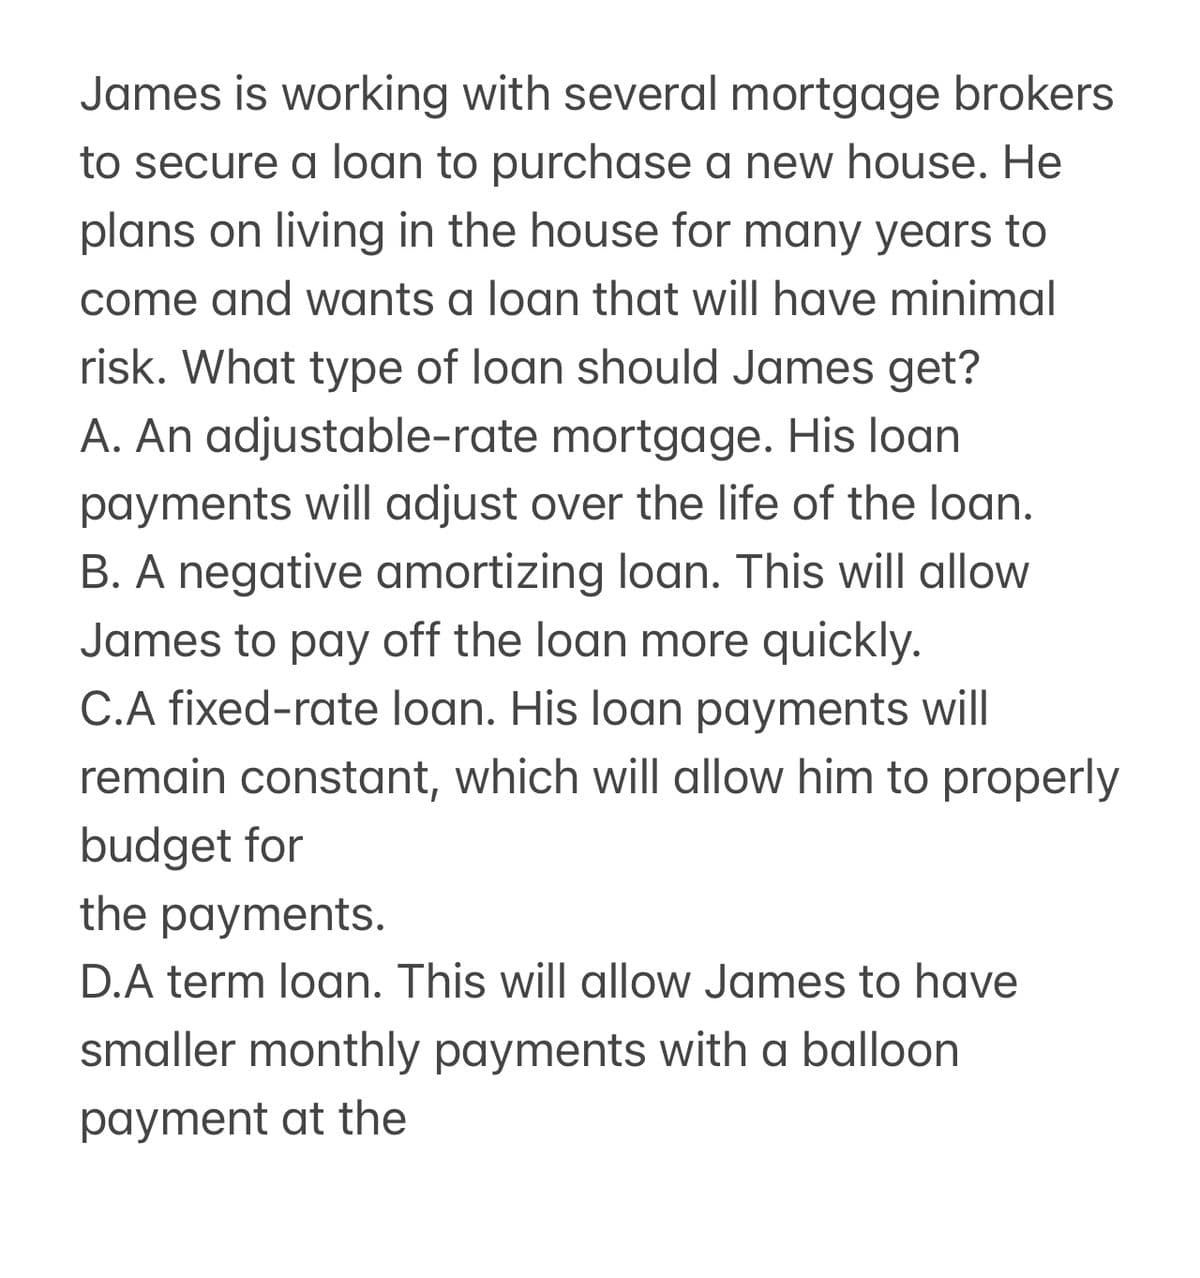 James is working with several mortgage brokers
to secure a loan to purchase a new house. He
plans on living in the house for many years to
come and wants a loan that will have minimal
risk. What type of loan should James get?
A. An adjustable-rate mortgage. His loan
payments will adjust over the life of the loan.
B. A negative amortizing loan. This will allow
James to pay off the loan more quickly.
C.A fixed-rate loan. His loan payments will
remain constant, which will allow him to properly
budget for
the payments.
D.A term loan. This will allow James to have
smaller monthly payments with a balloon
payment at the